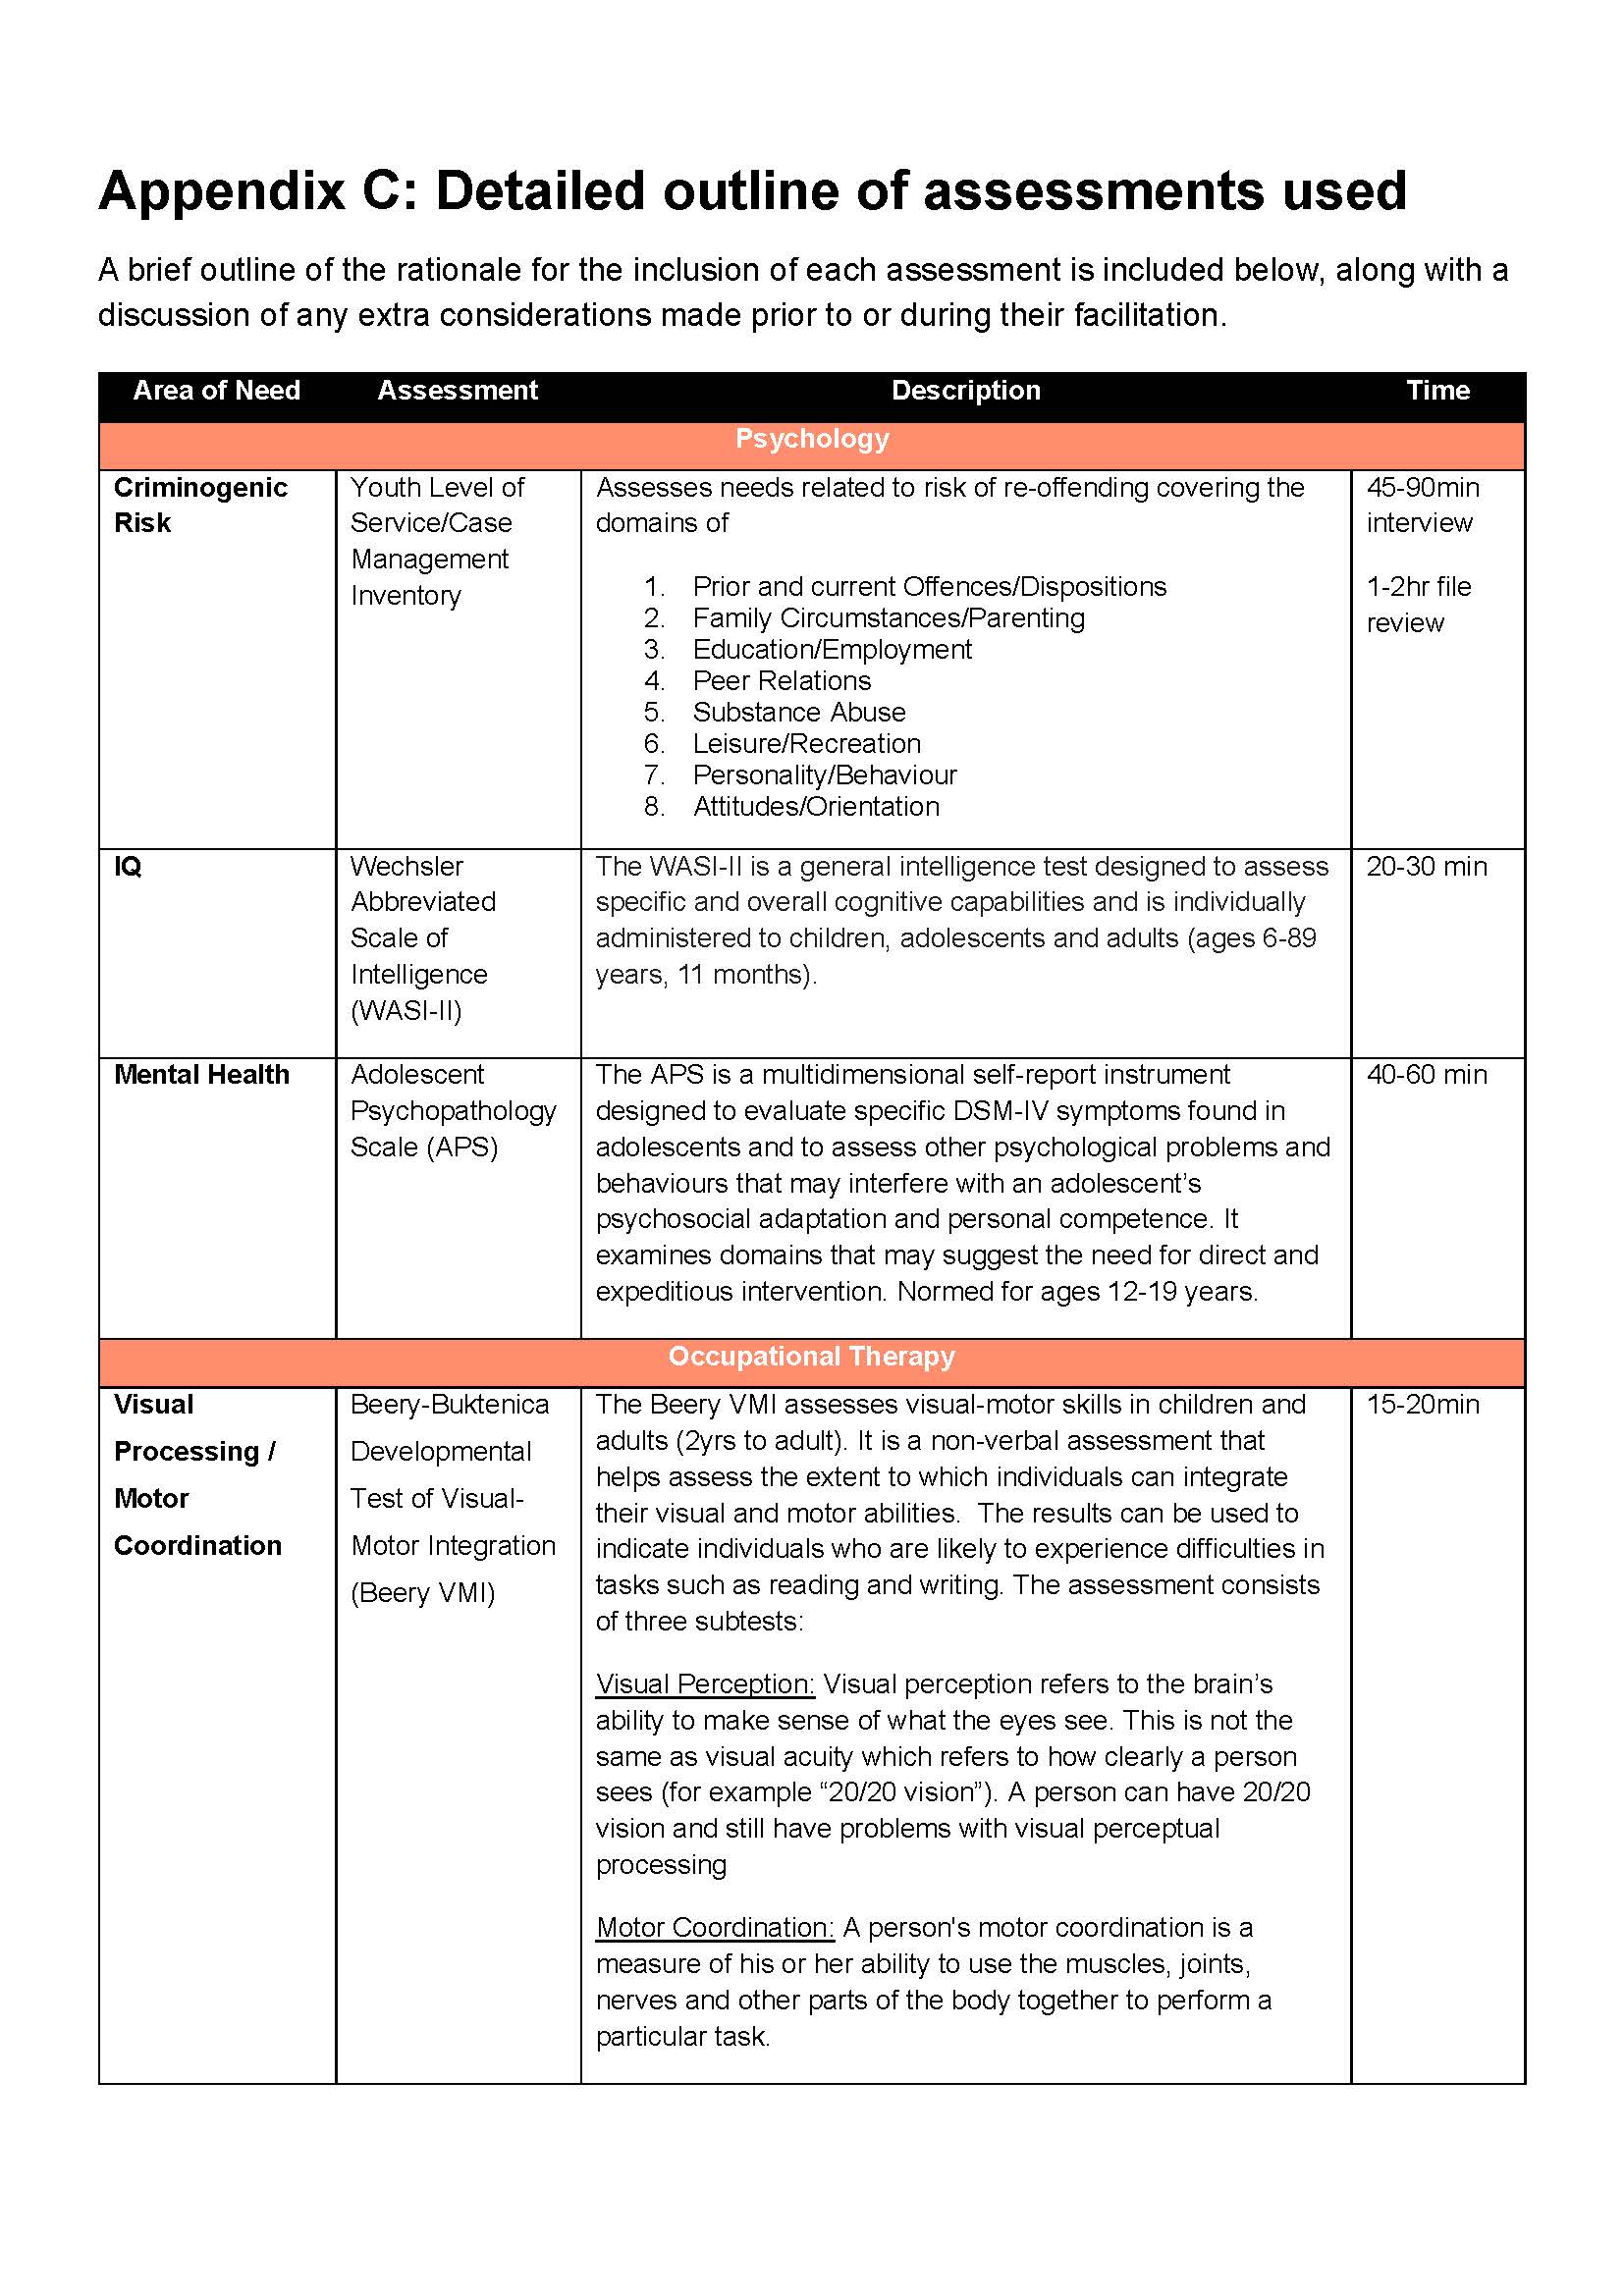 Detailed outline of assessments used. A brief outline of the rationale for the inclusion of each assessment is included below, along with a discussion of any extra considerations made prior to, or during, their facilitation. This form has three pages. Form contents: a description of the area of need, the method of assessment, and time allowed. For example, an assessment of mental health assessed via the adolescent psycho-pathology scale (APS), which takes 40 to 60 minutes.